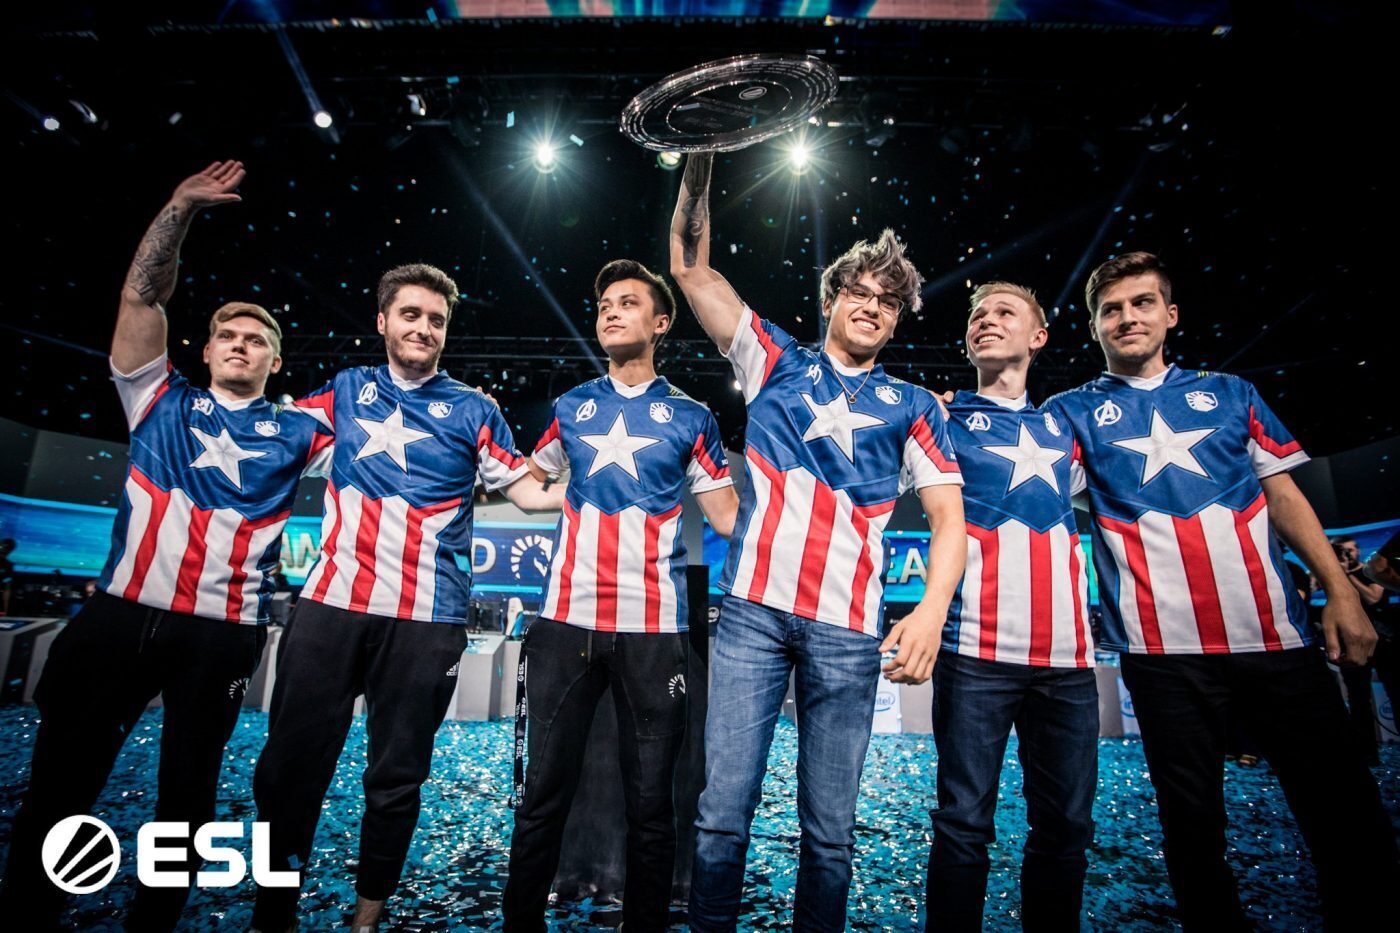 Team Liquid takes home gold at IEM Chicago. (Image courtesy of Intel ExtremeMasters)